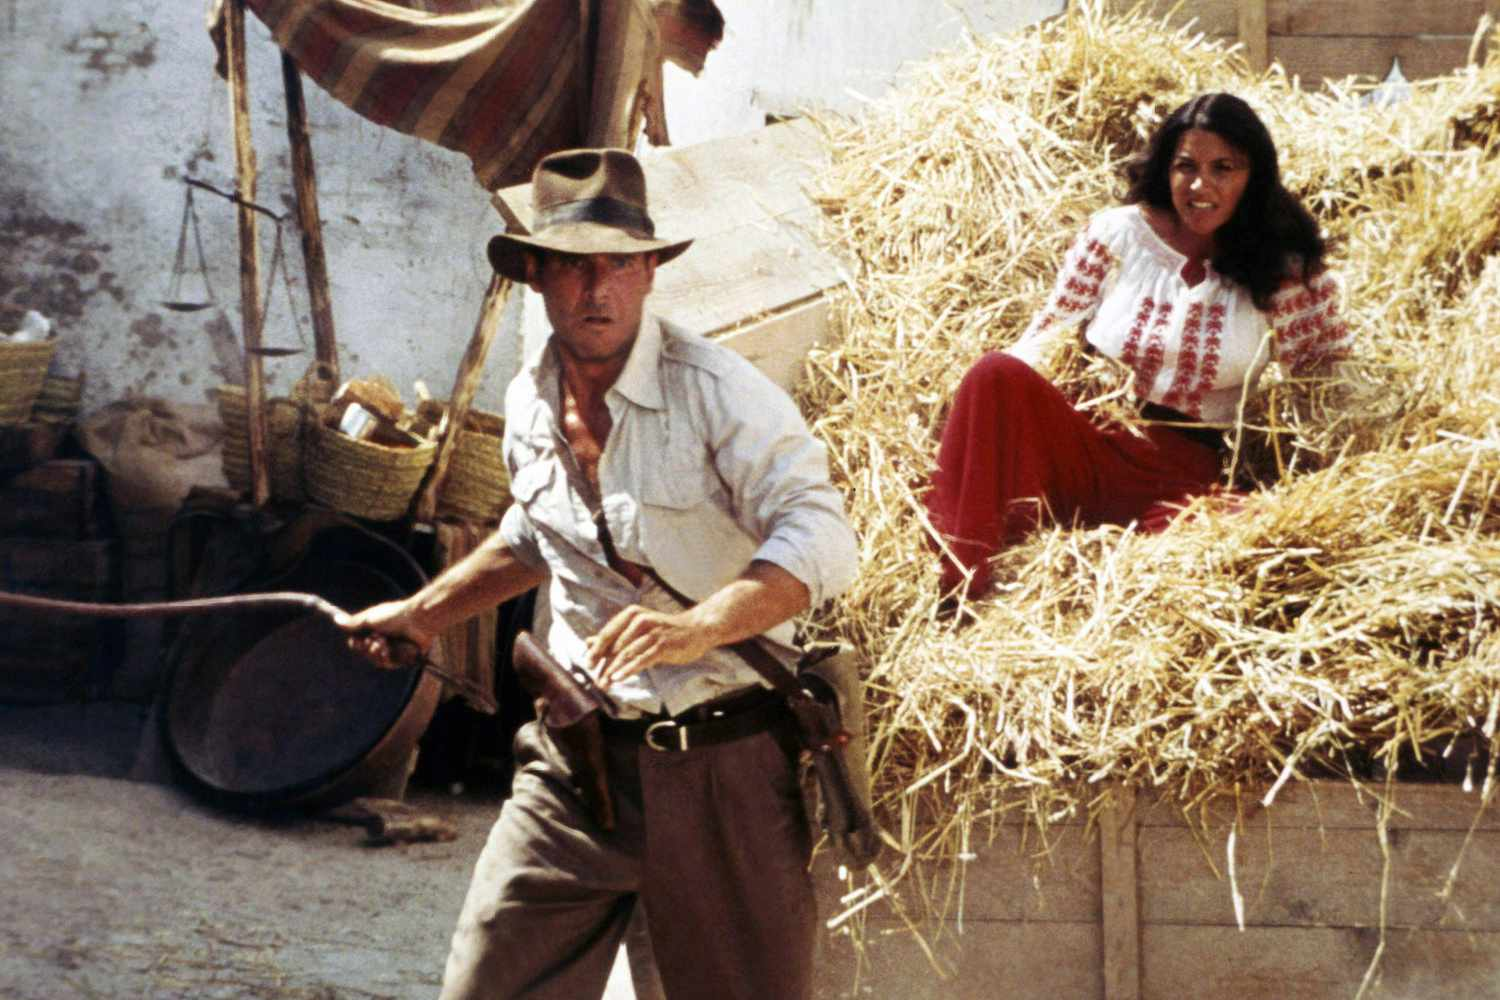 Harrison Ford in an action scene from Raiders of The Lost Ark 